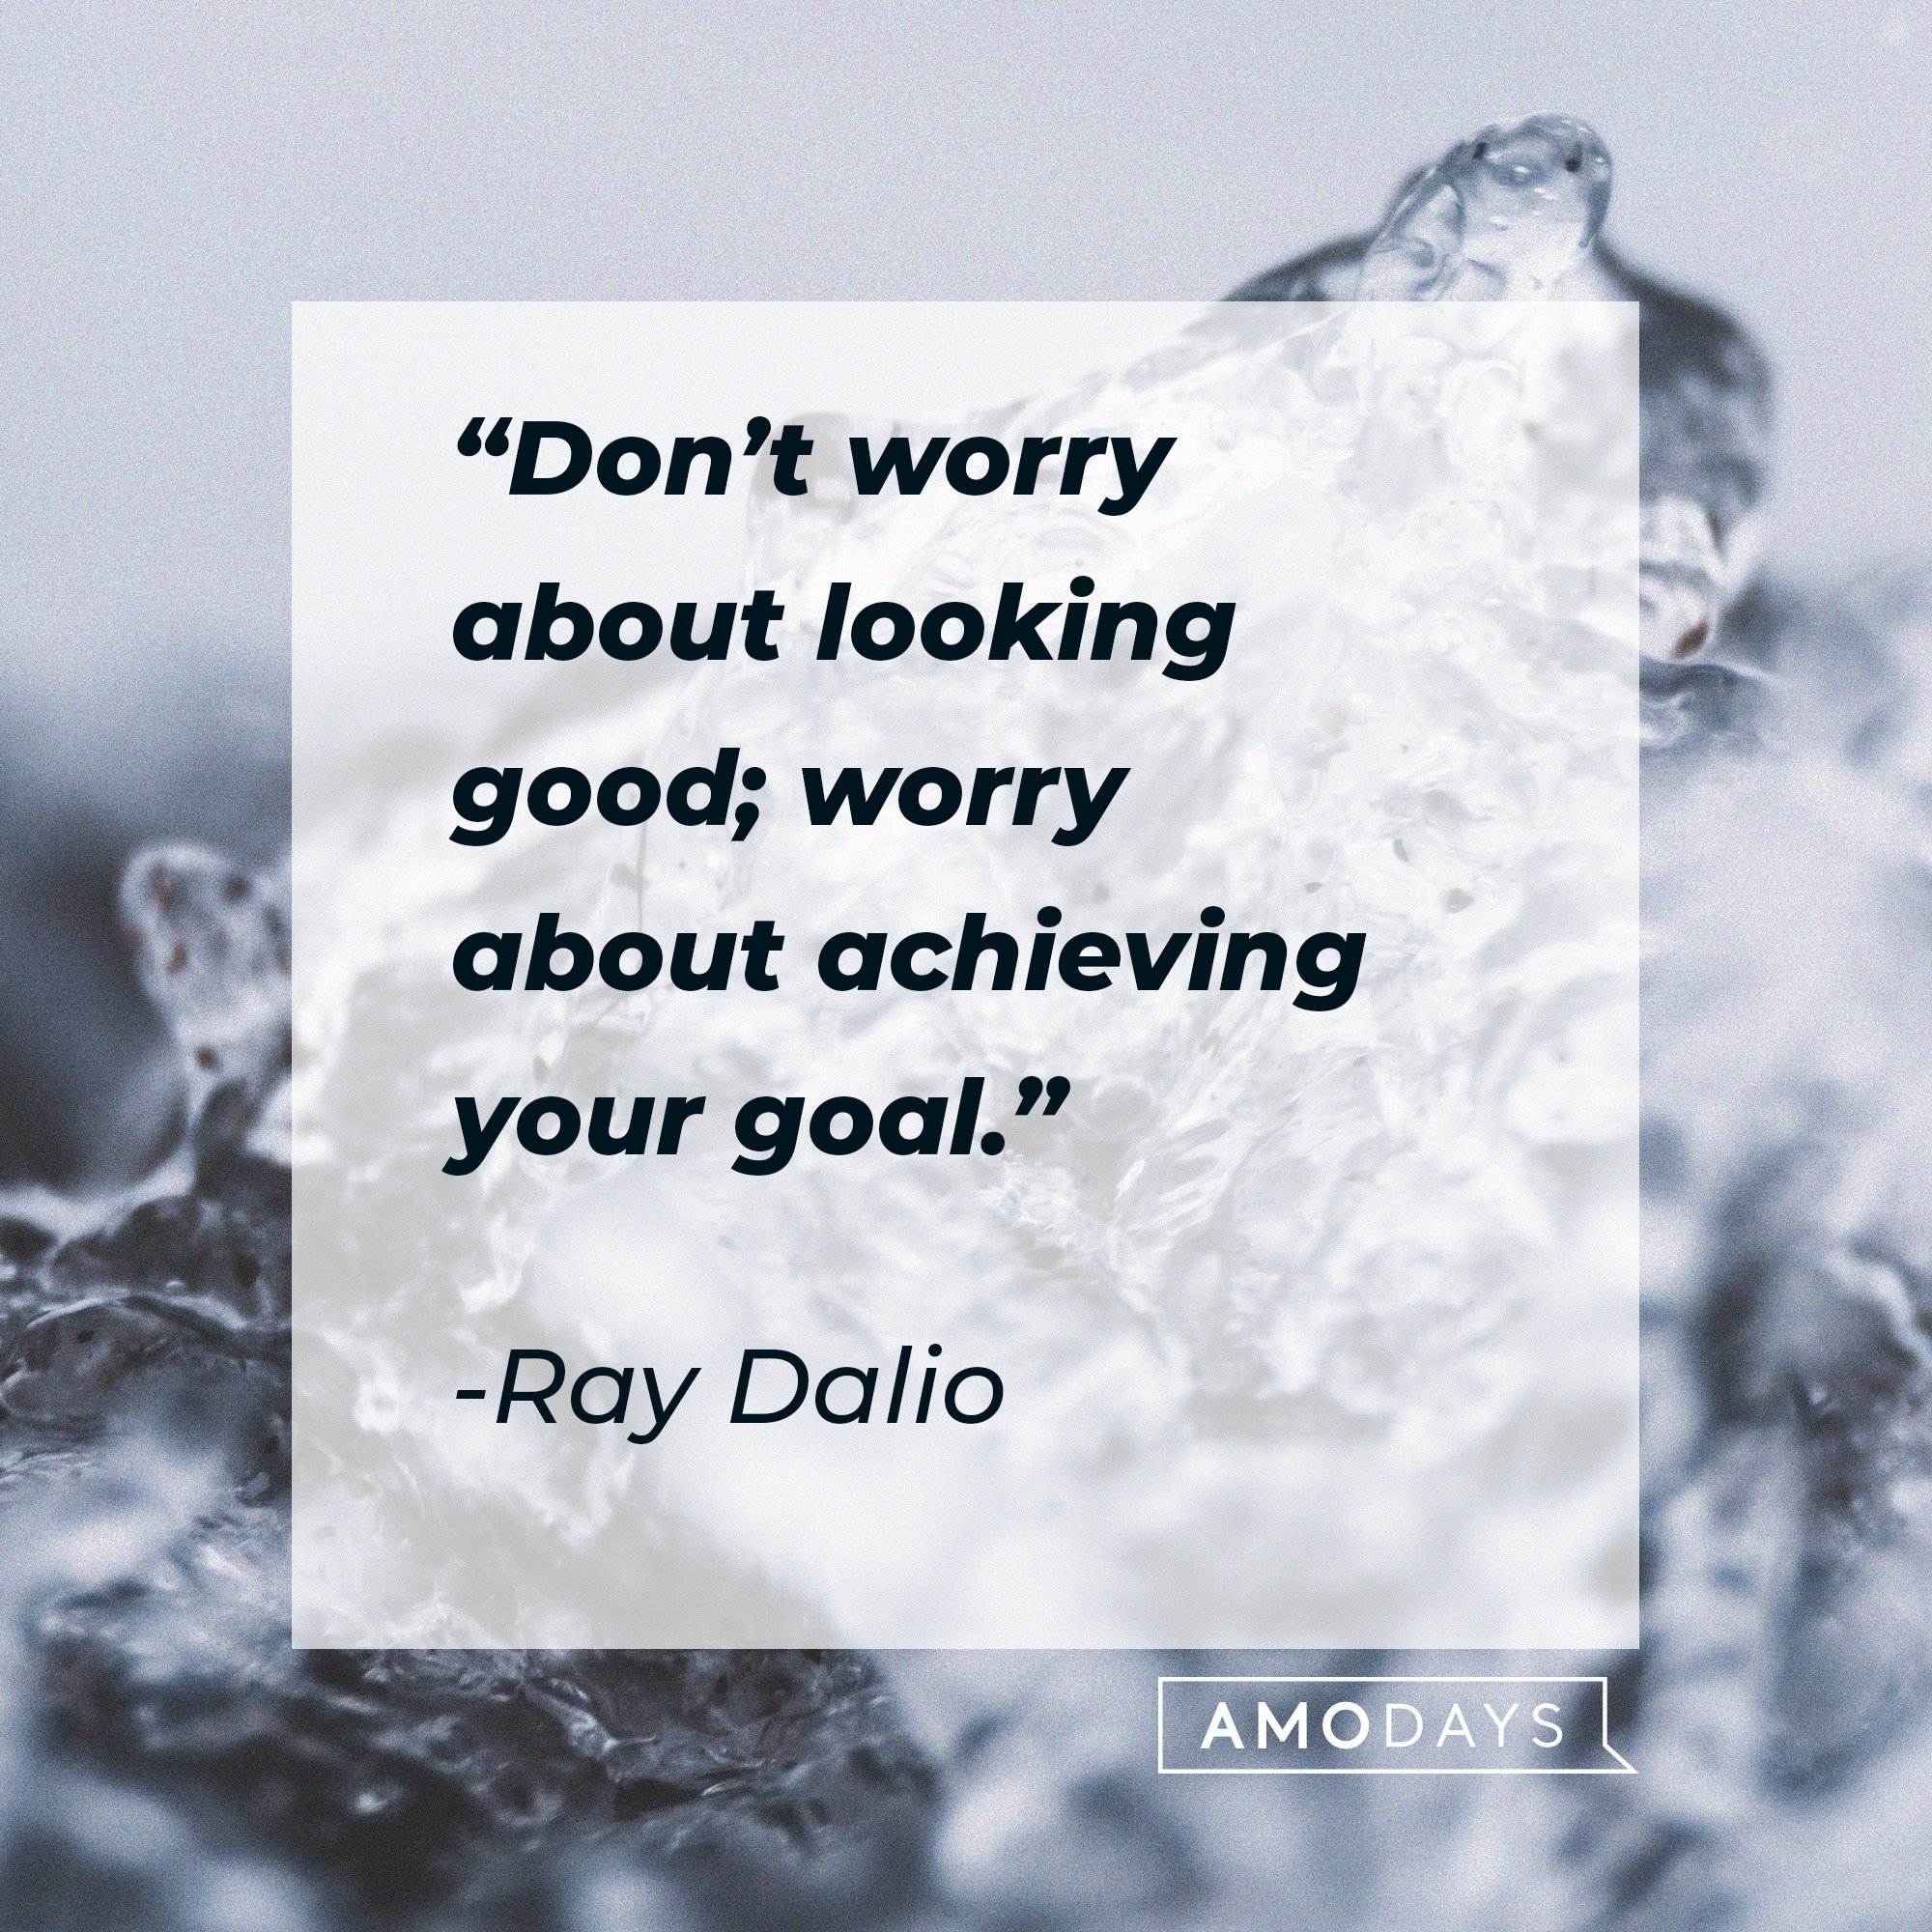 Ray Dalio's quote: “Don’t worry about looking good; worry about achieving your goal.” | Image: AmoDays